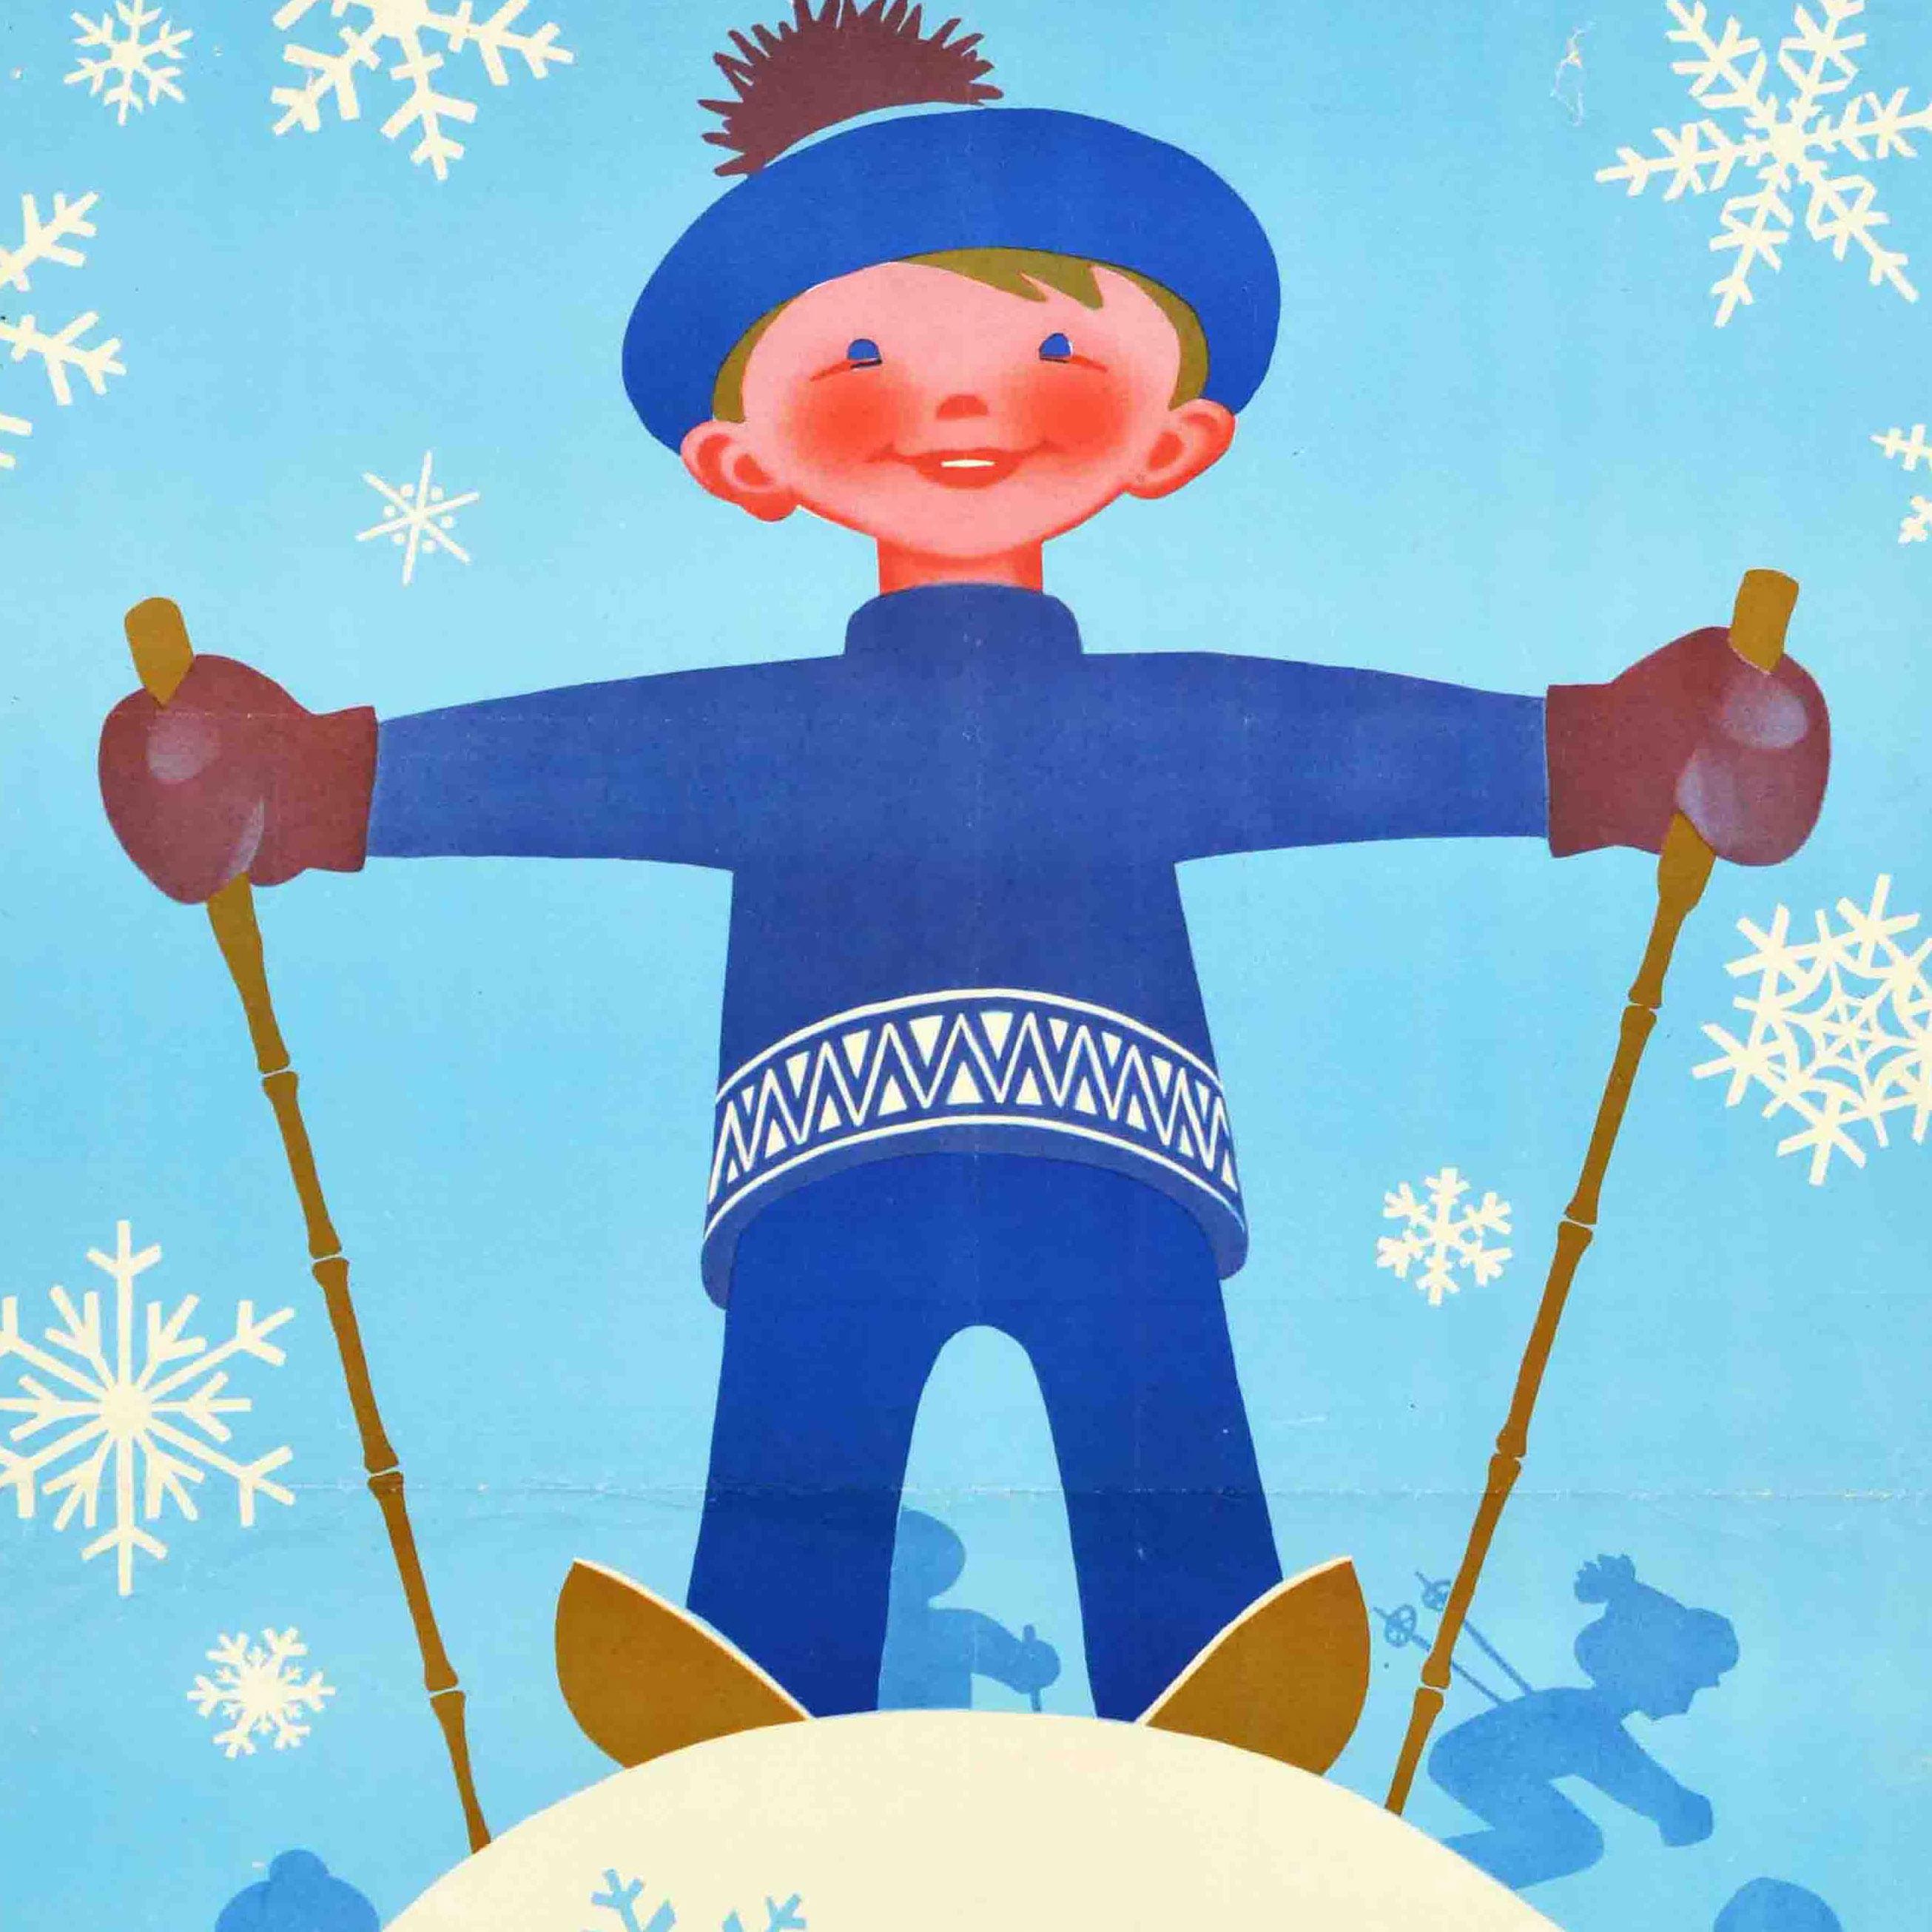 Original vintage sport health poster - Be strong and healthy from a young age! / ????????? ???????! Great image featuring a young smiling child with rosy cheeks standing on skis on a snowy hill and holding wooden ski poles in outstretched arms with